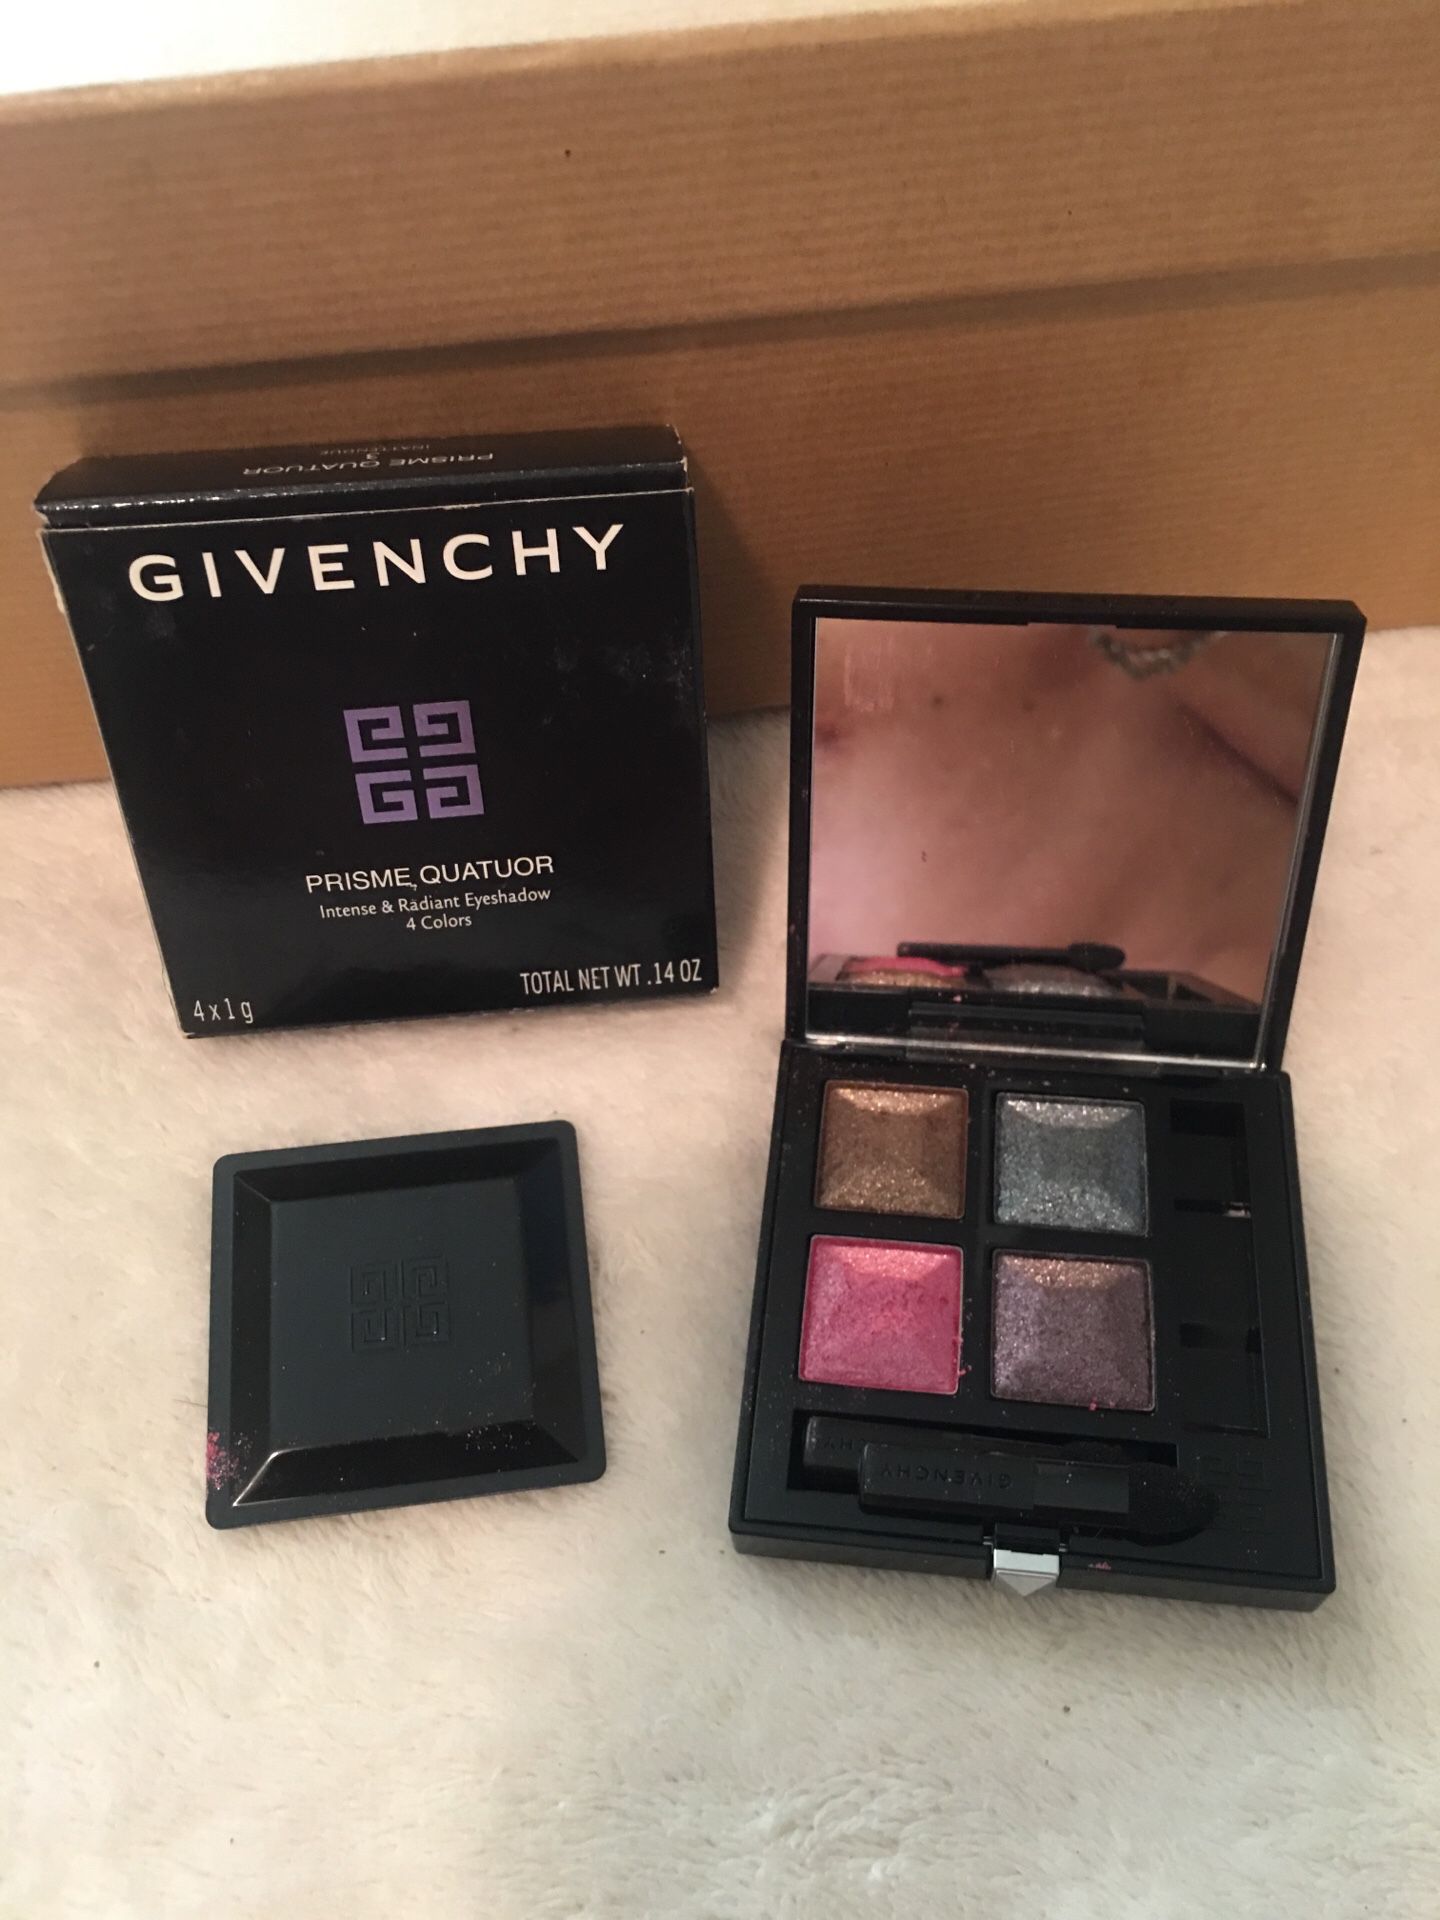 Givenchy intense radiant eye color quad sparkling new in box